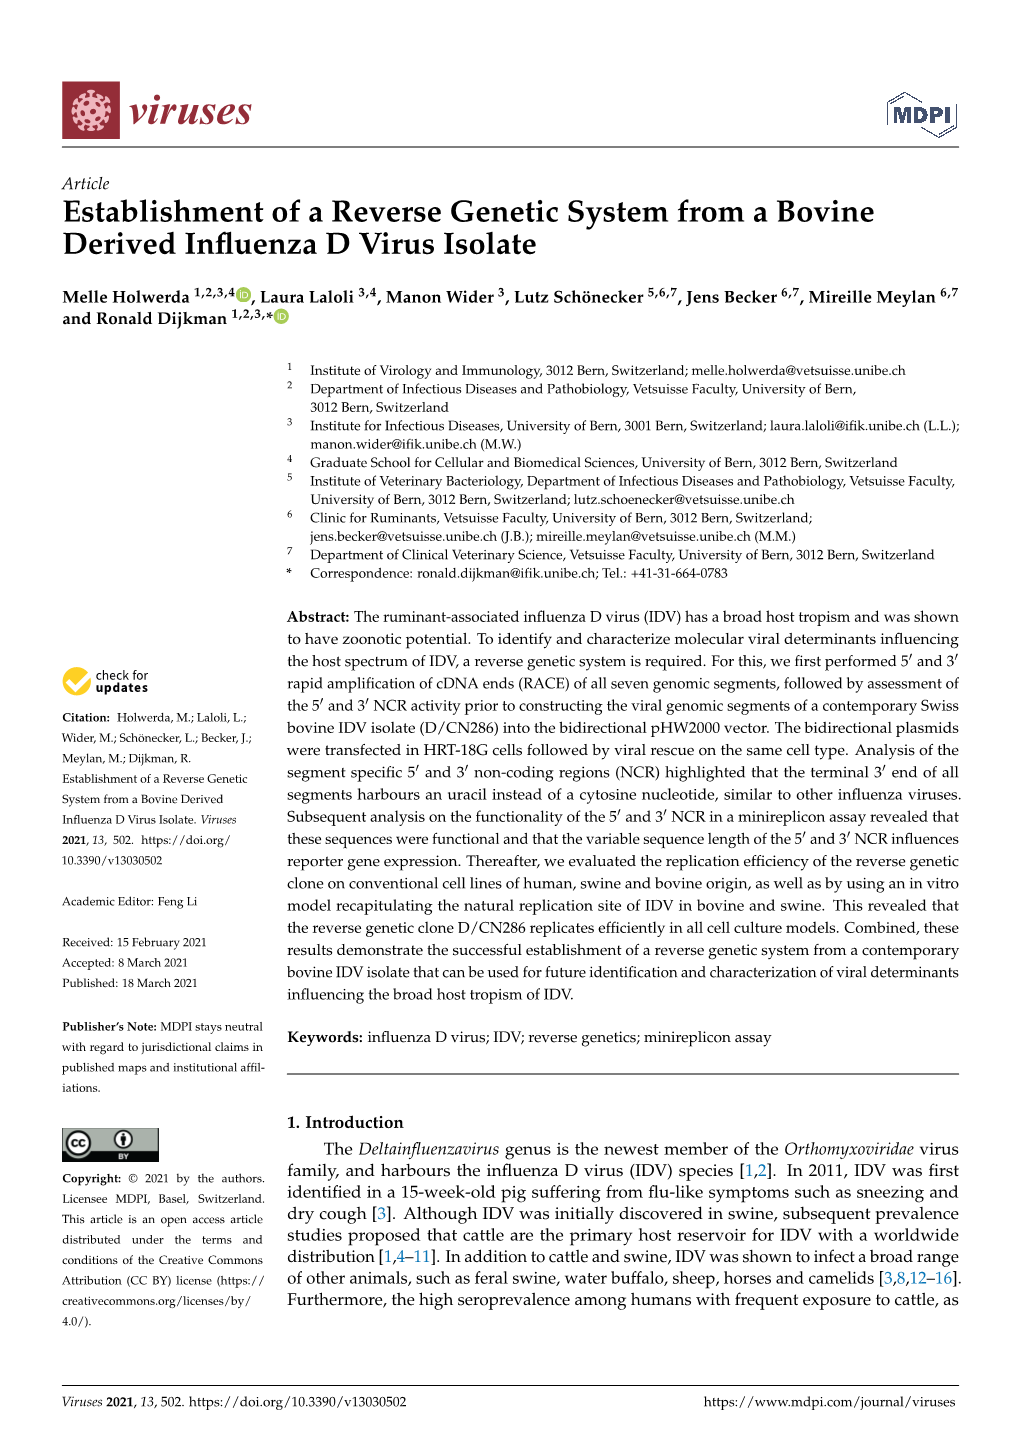 Establishment of a Reverse Genetic System from a Bovine Derived Influenza D Virus Isolate